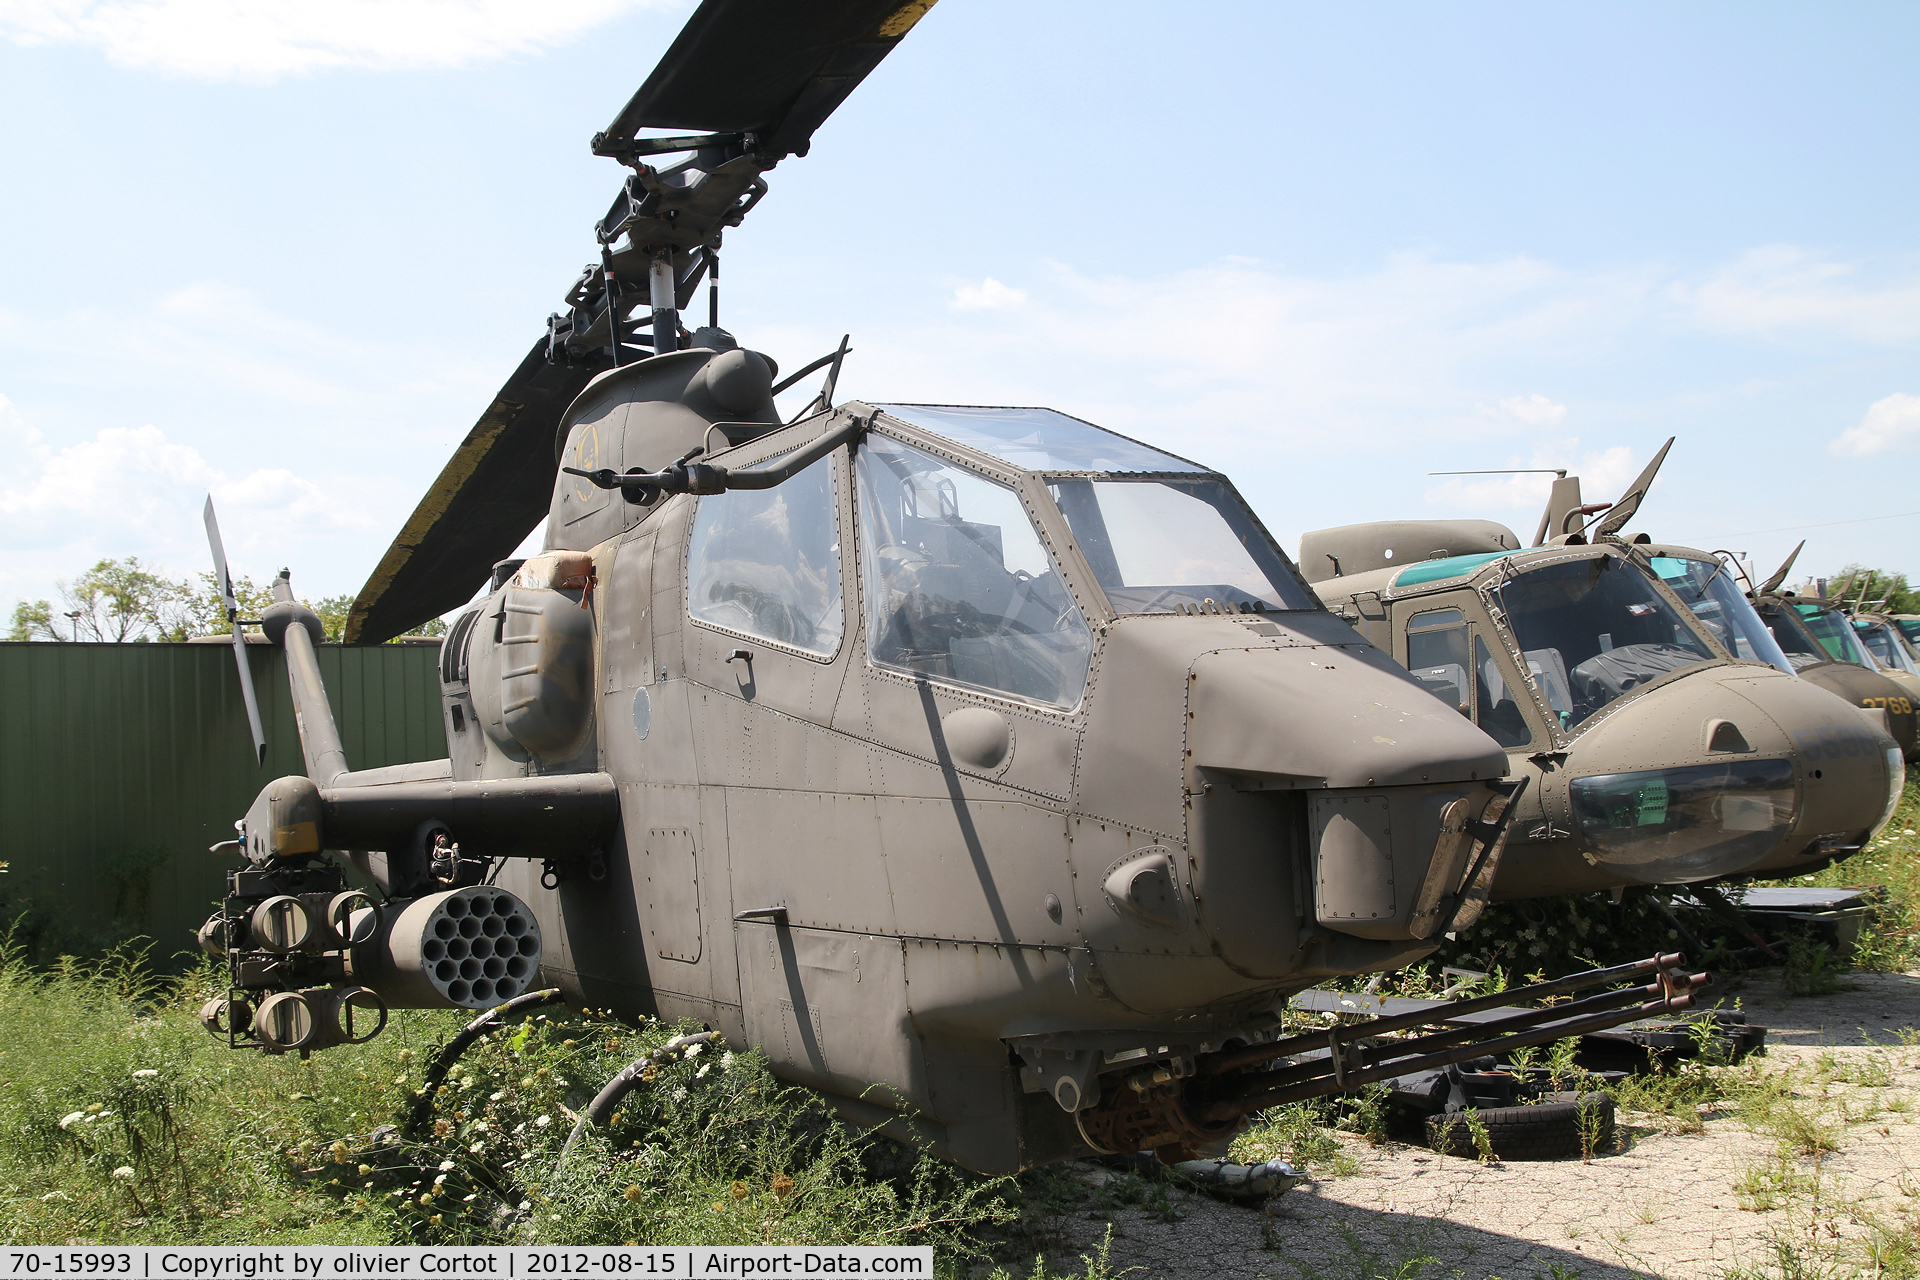 70-15993, 1970 Bell AH-1F Cobra C/N 20937, one of the russel military museum's cobras